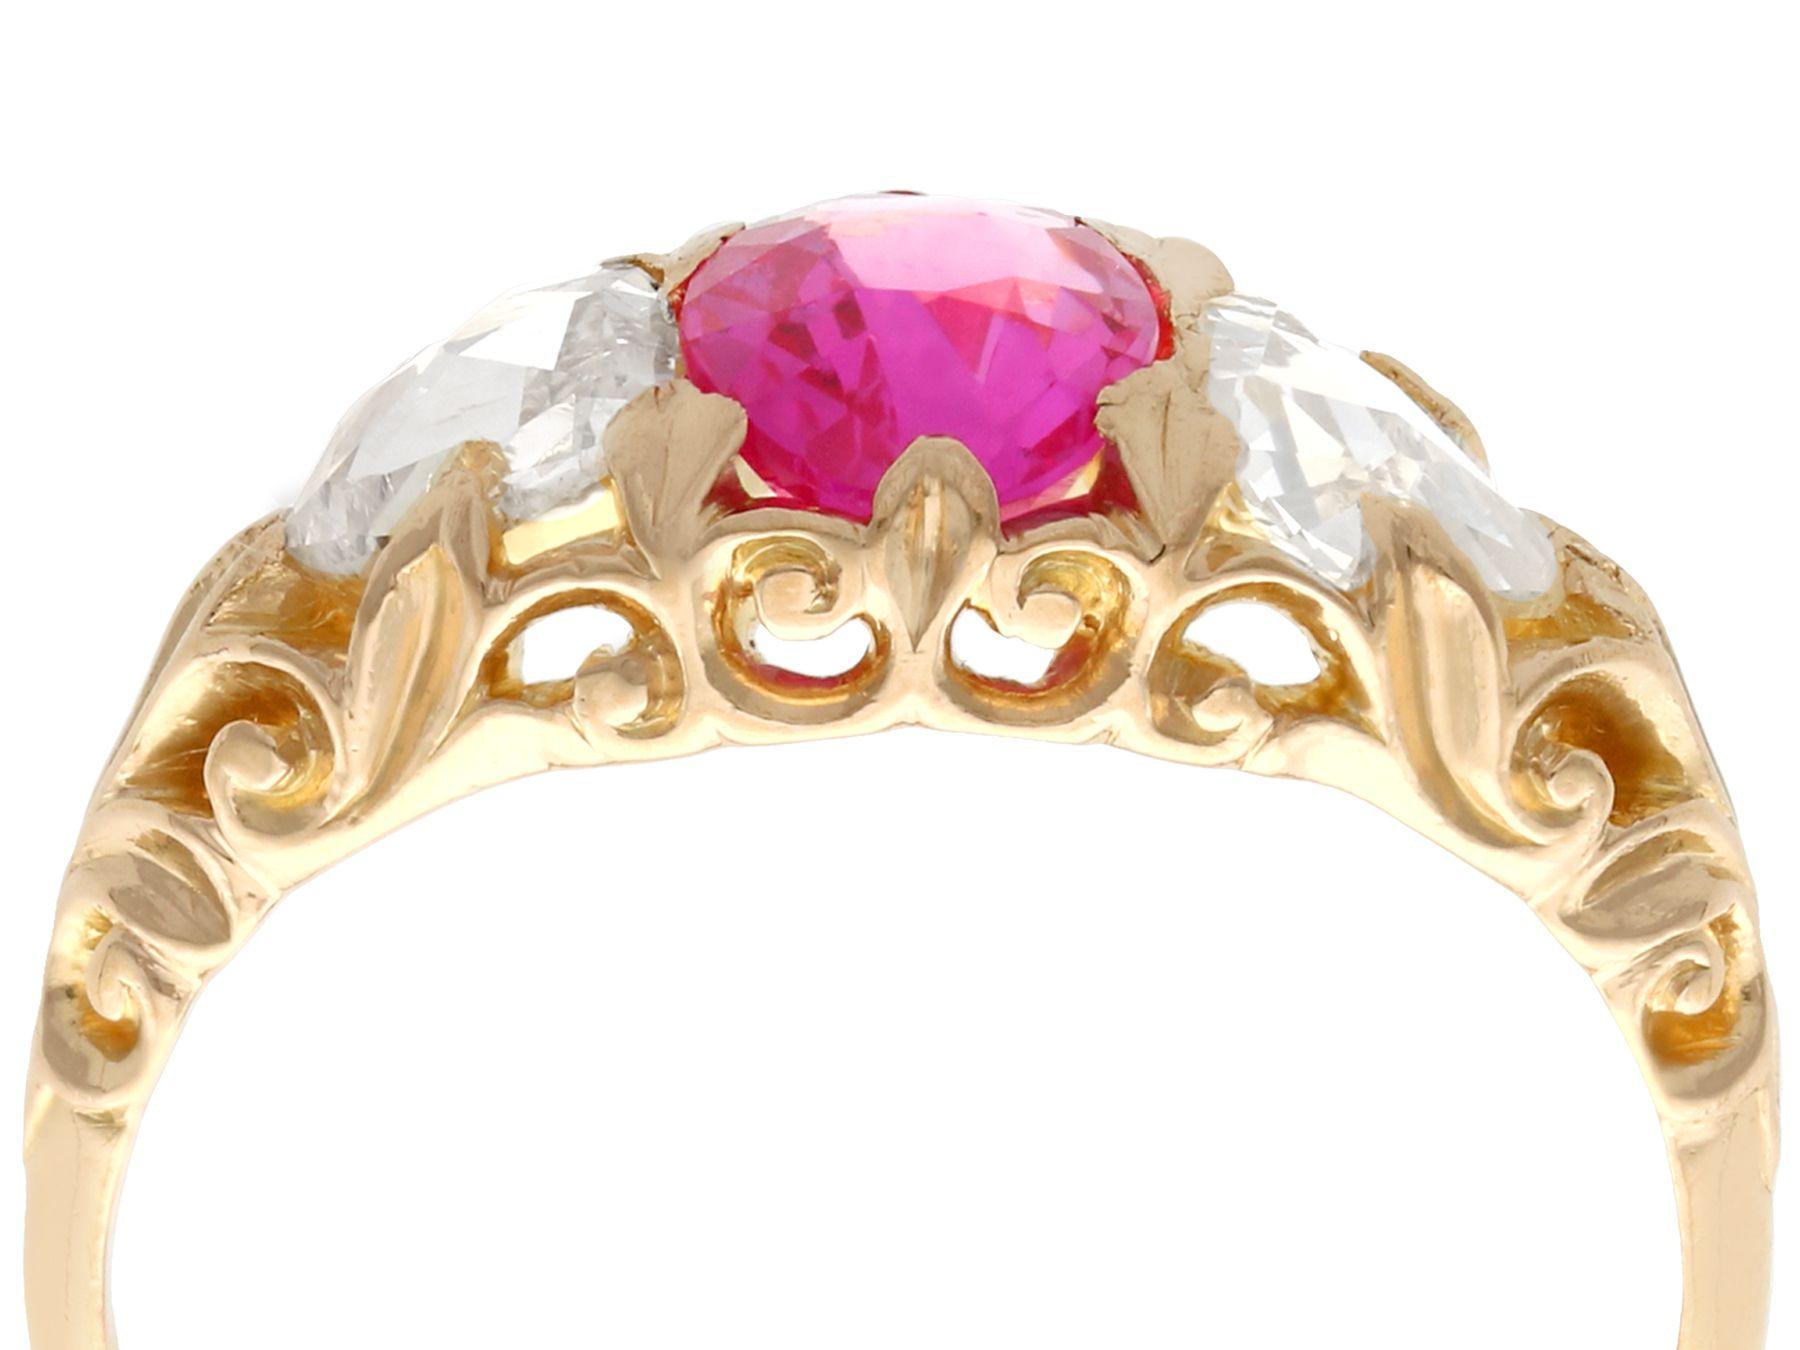 A stunning, fine and impressive antique Victorian 1.28 carat Burmese pink sapphire and 0.76 carat diamond, 22 karat yellow gold trilogy ring; part of our diverse antique jewelry collections.

This stunning, fine and impressive antique oval cut pink